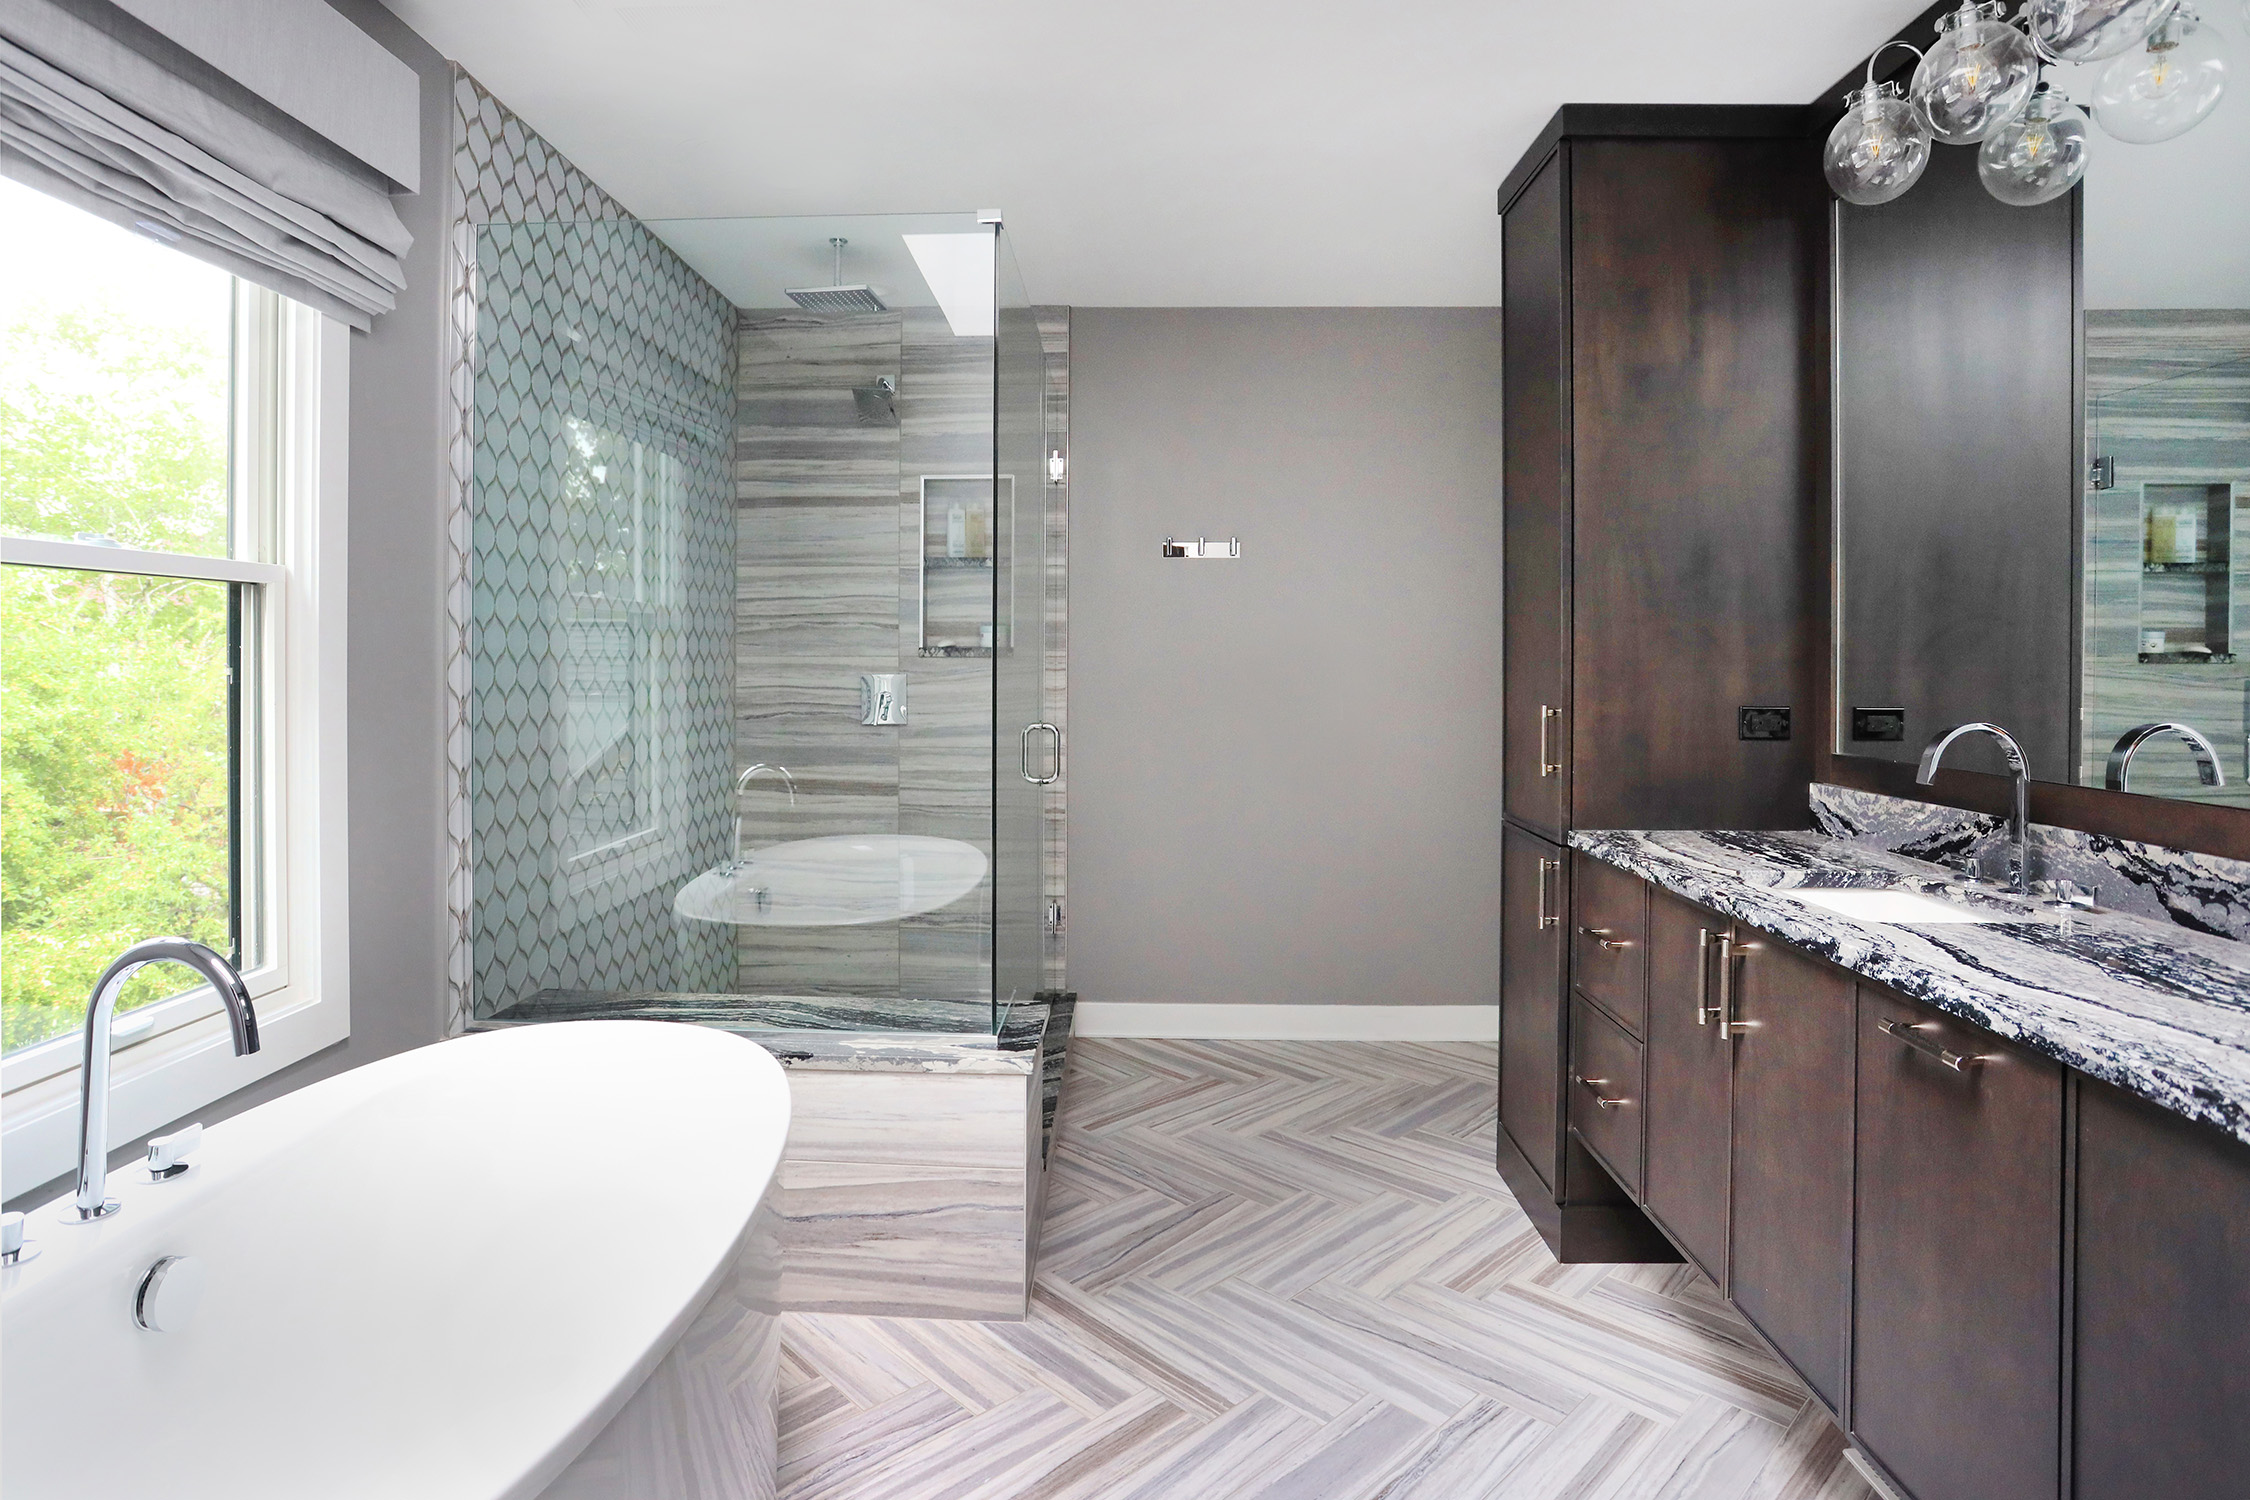 frameless shower and stand alone tub with dark vanity and patterned floor tile